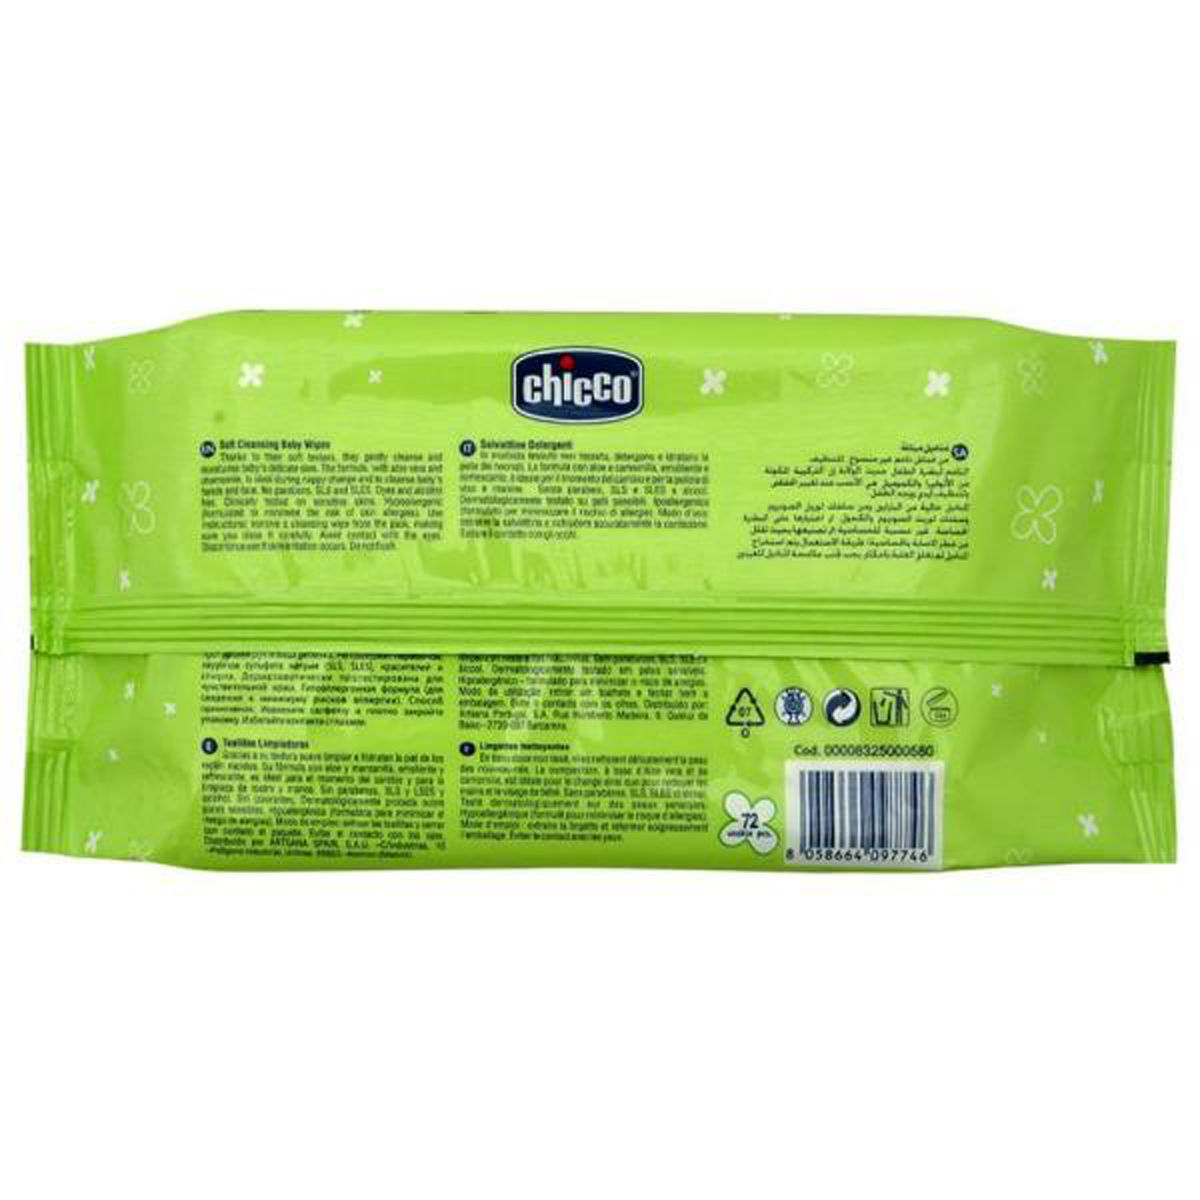 Chicco Baby Moments Soft Cleansing Wipes, 72 Count, Pack of 1 